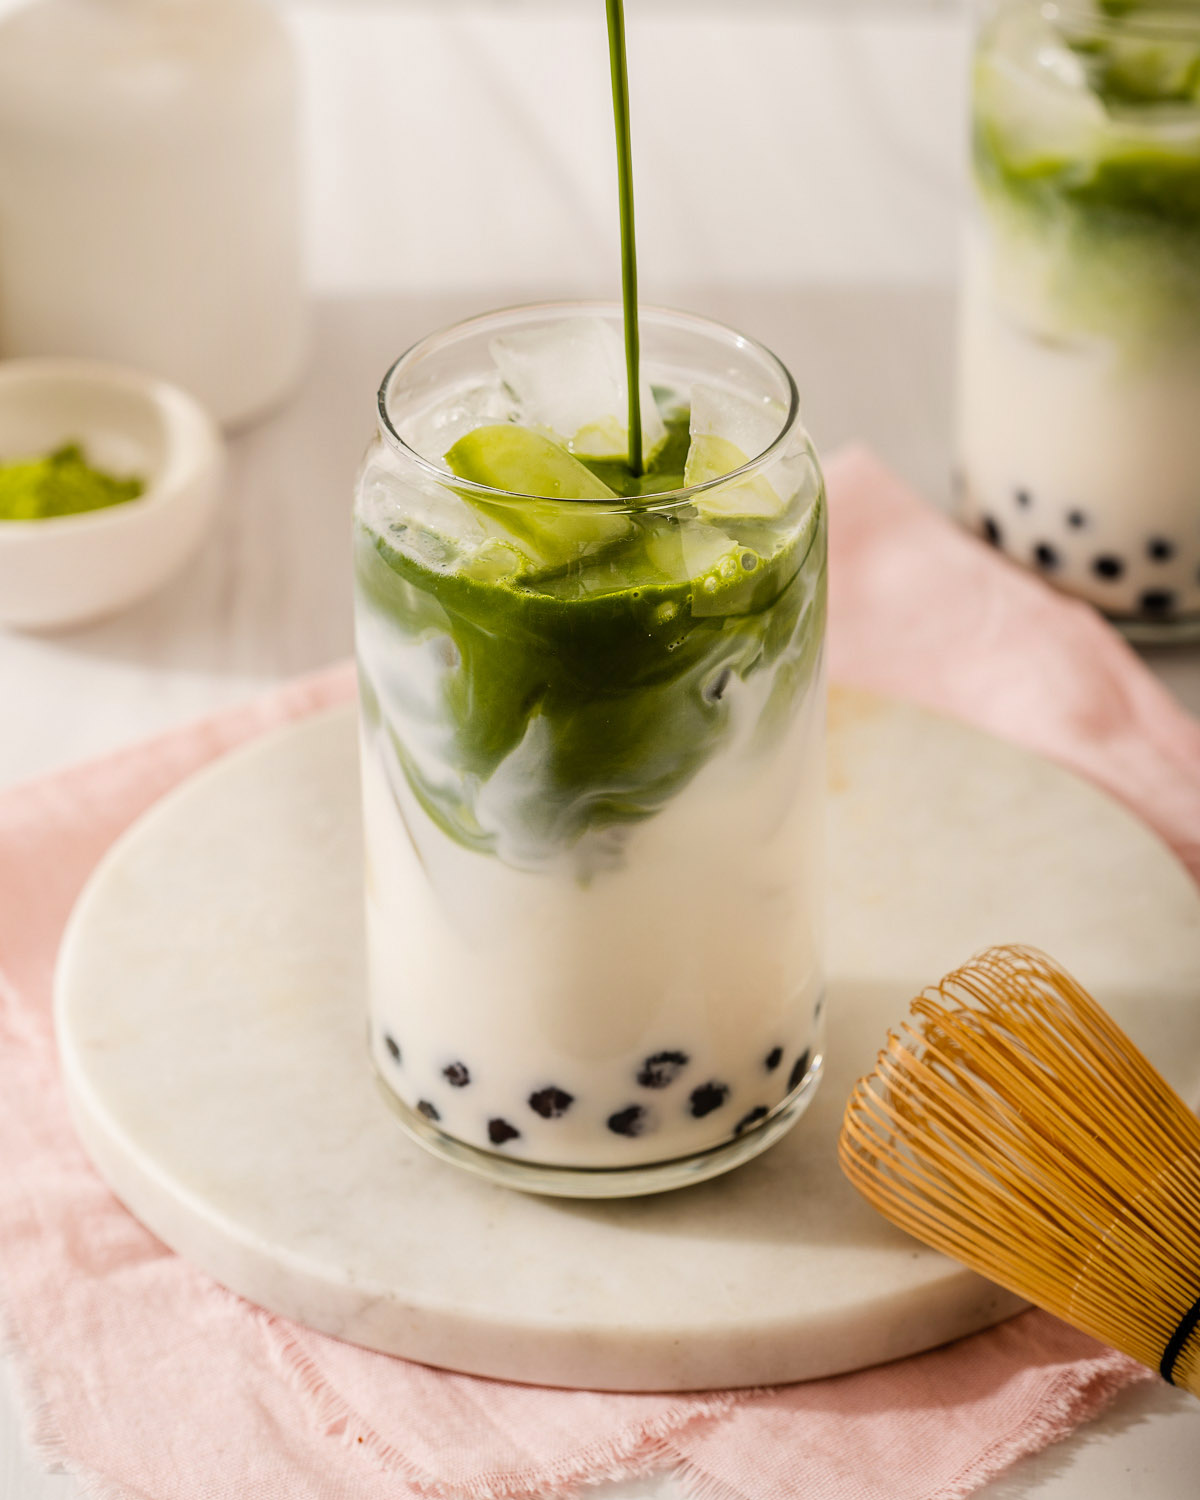 Pouring the matcha into a glass with milk and tapioca pearls.